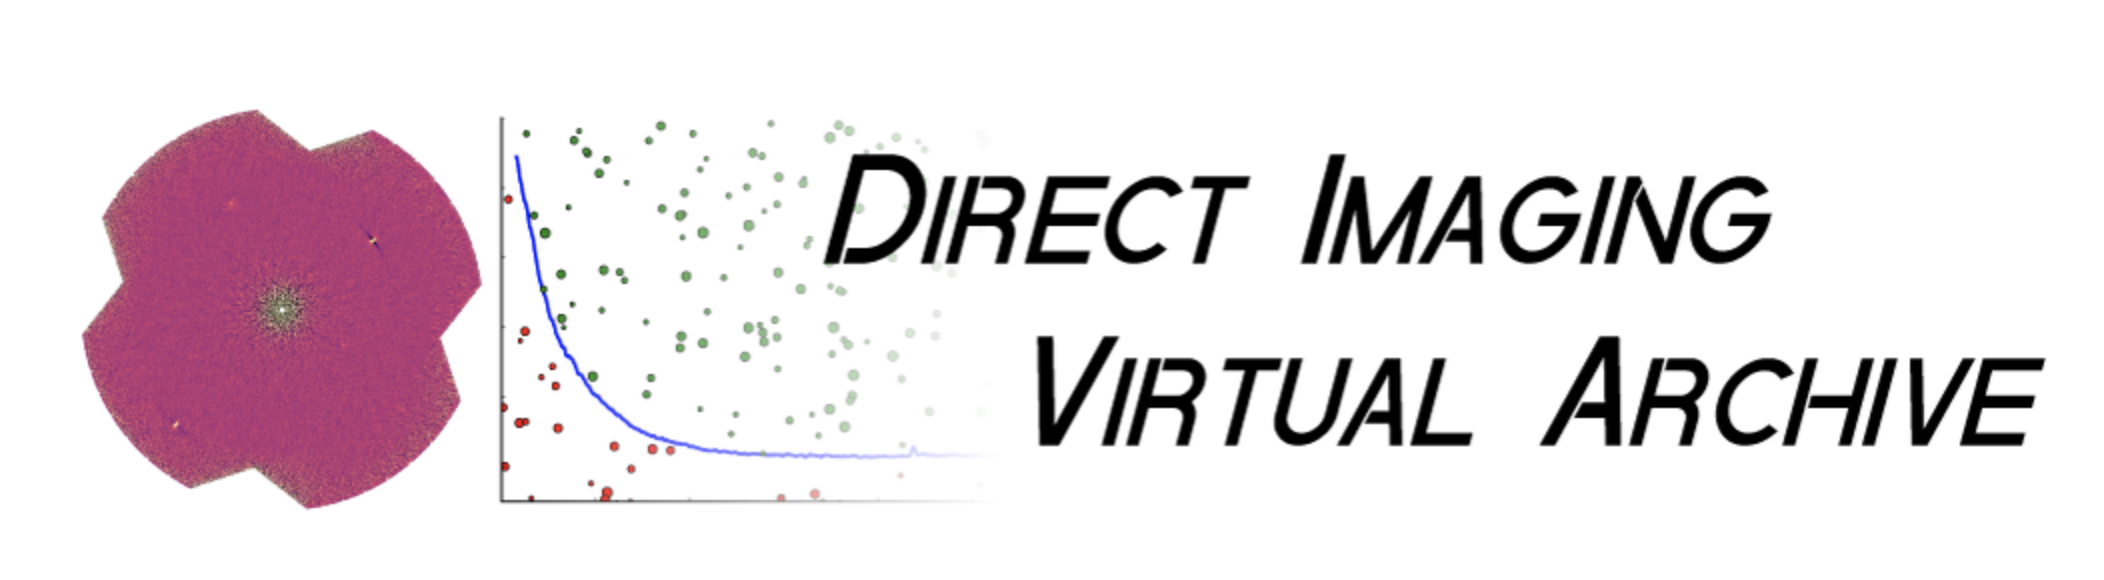 Direct Imaging Virtual Archive